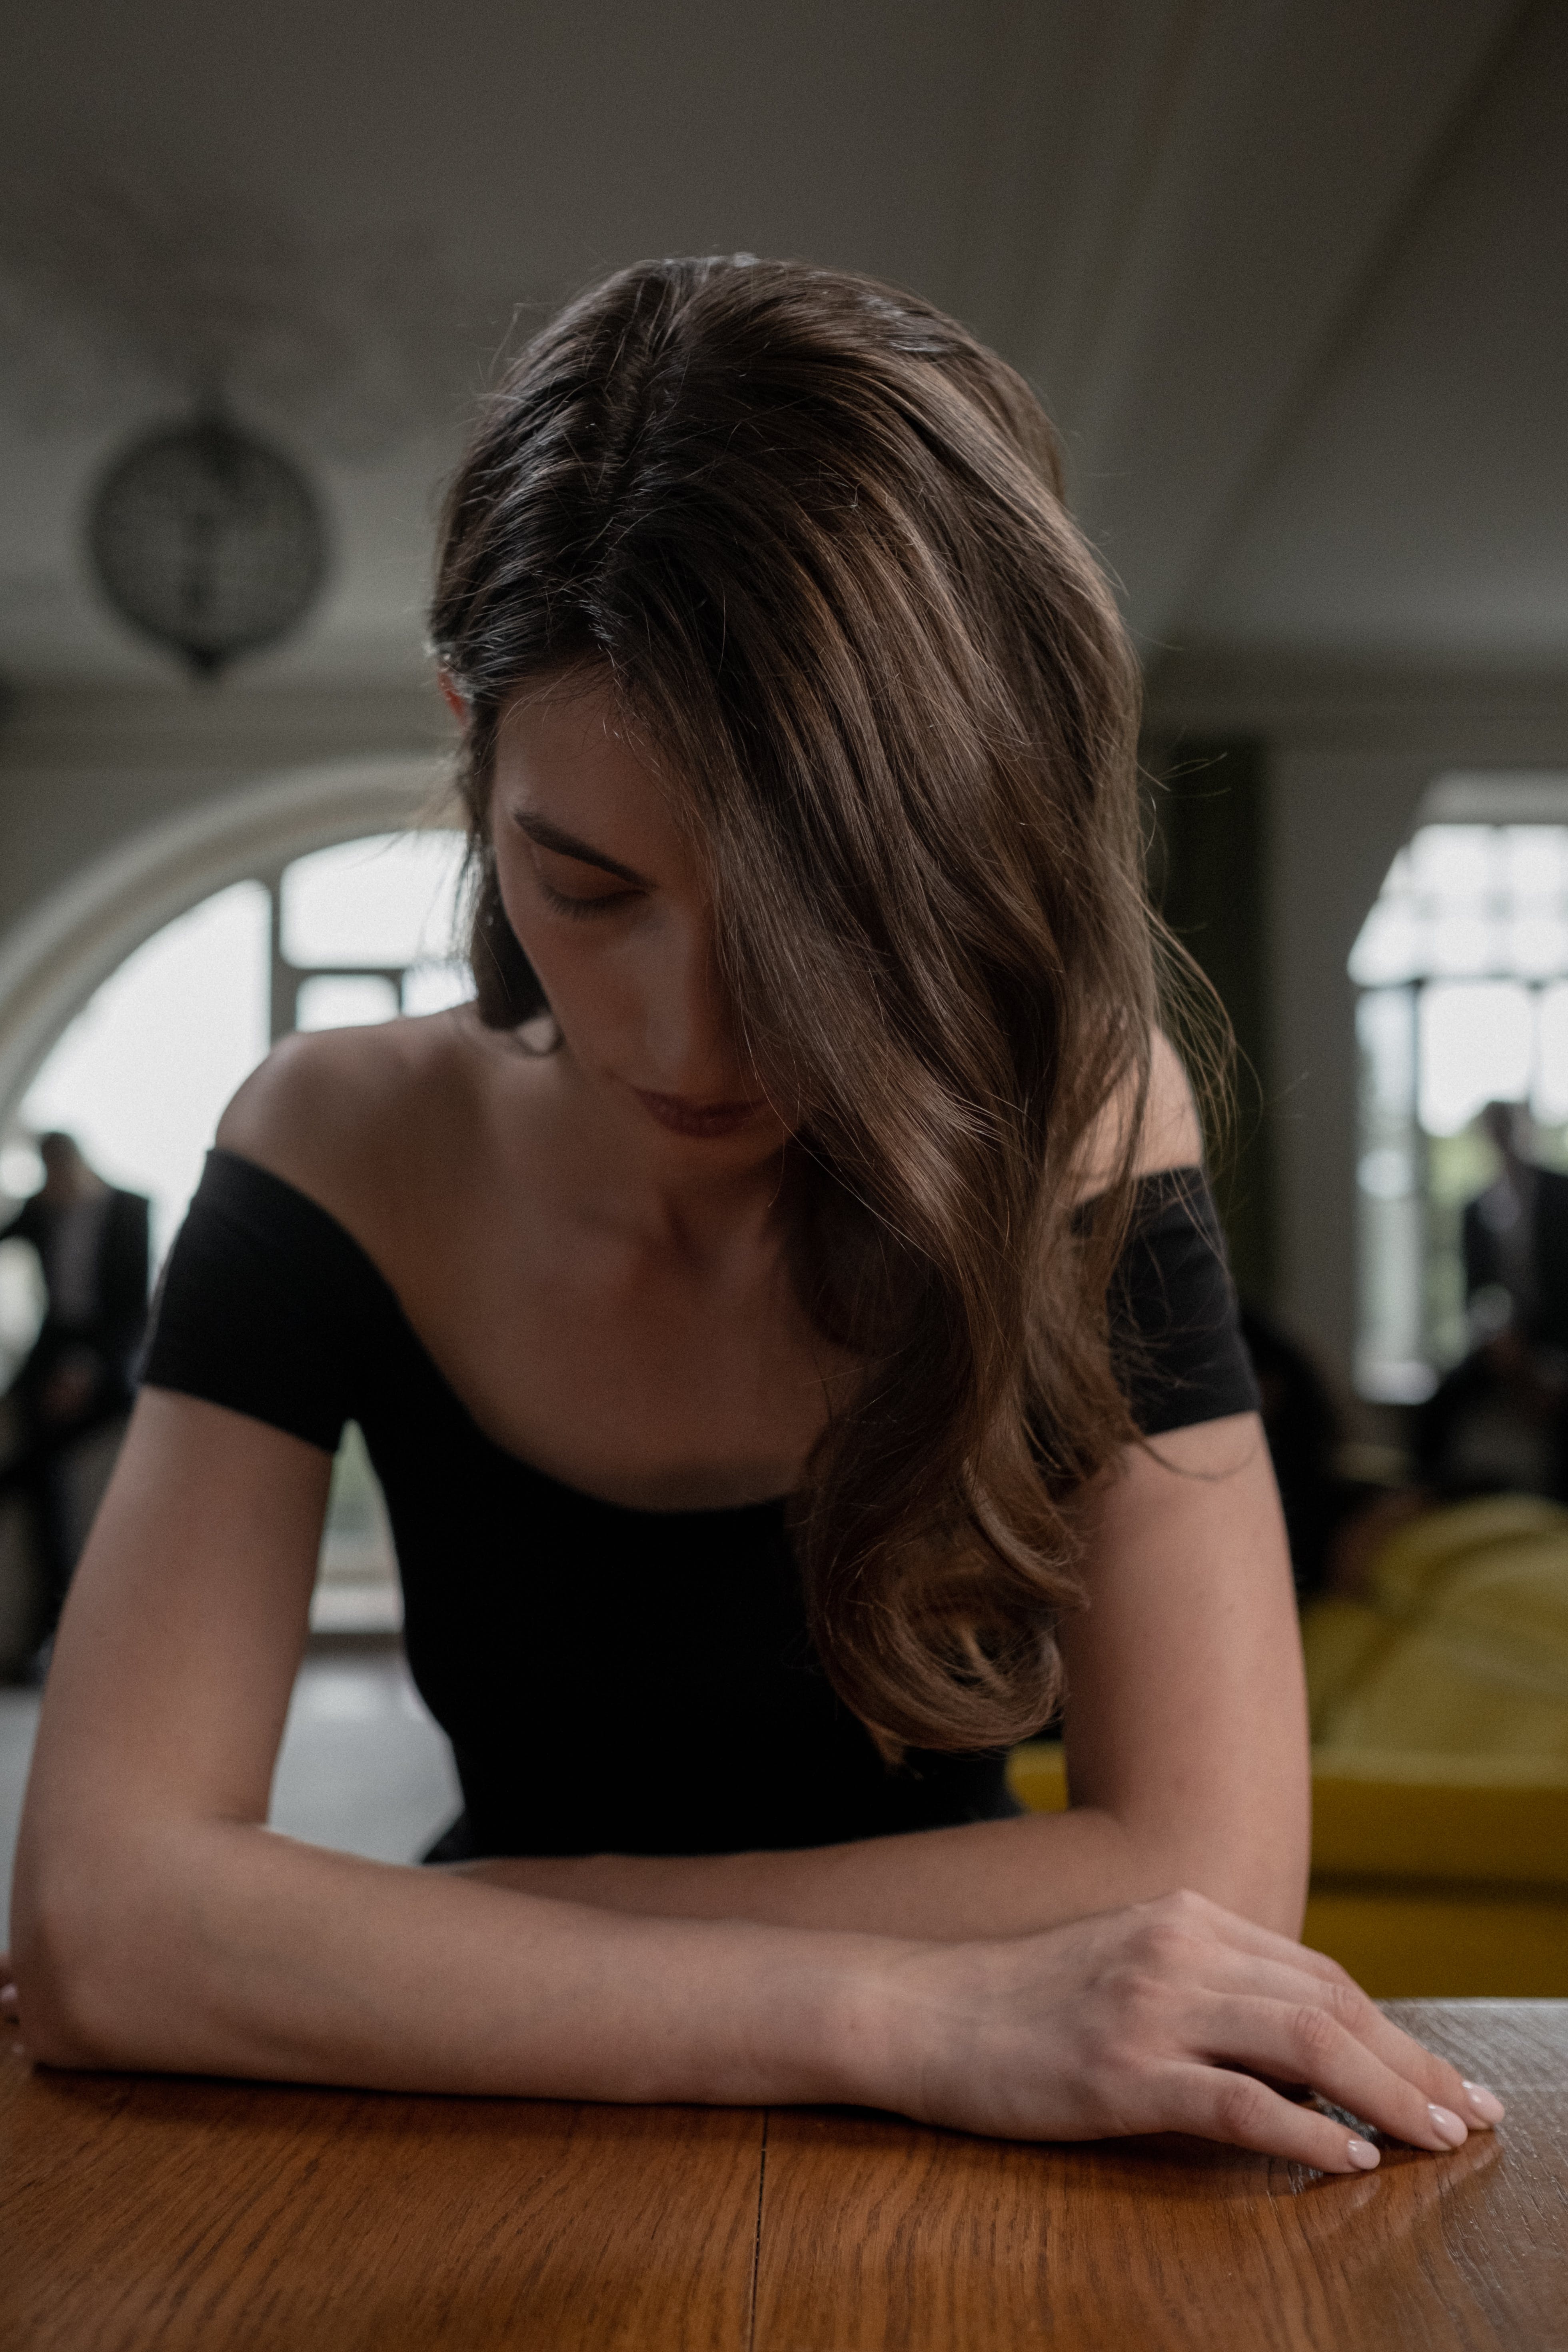 A woman sitting at a table while looking down | Source: Pexels